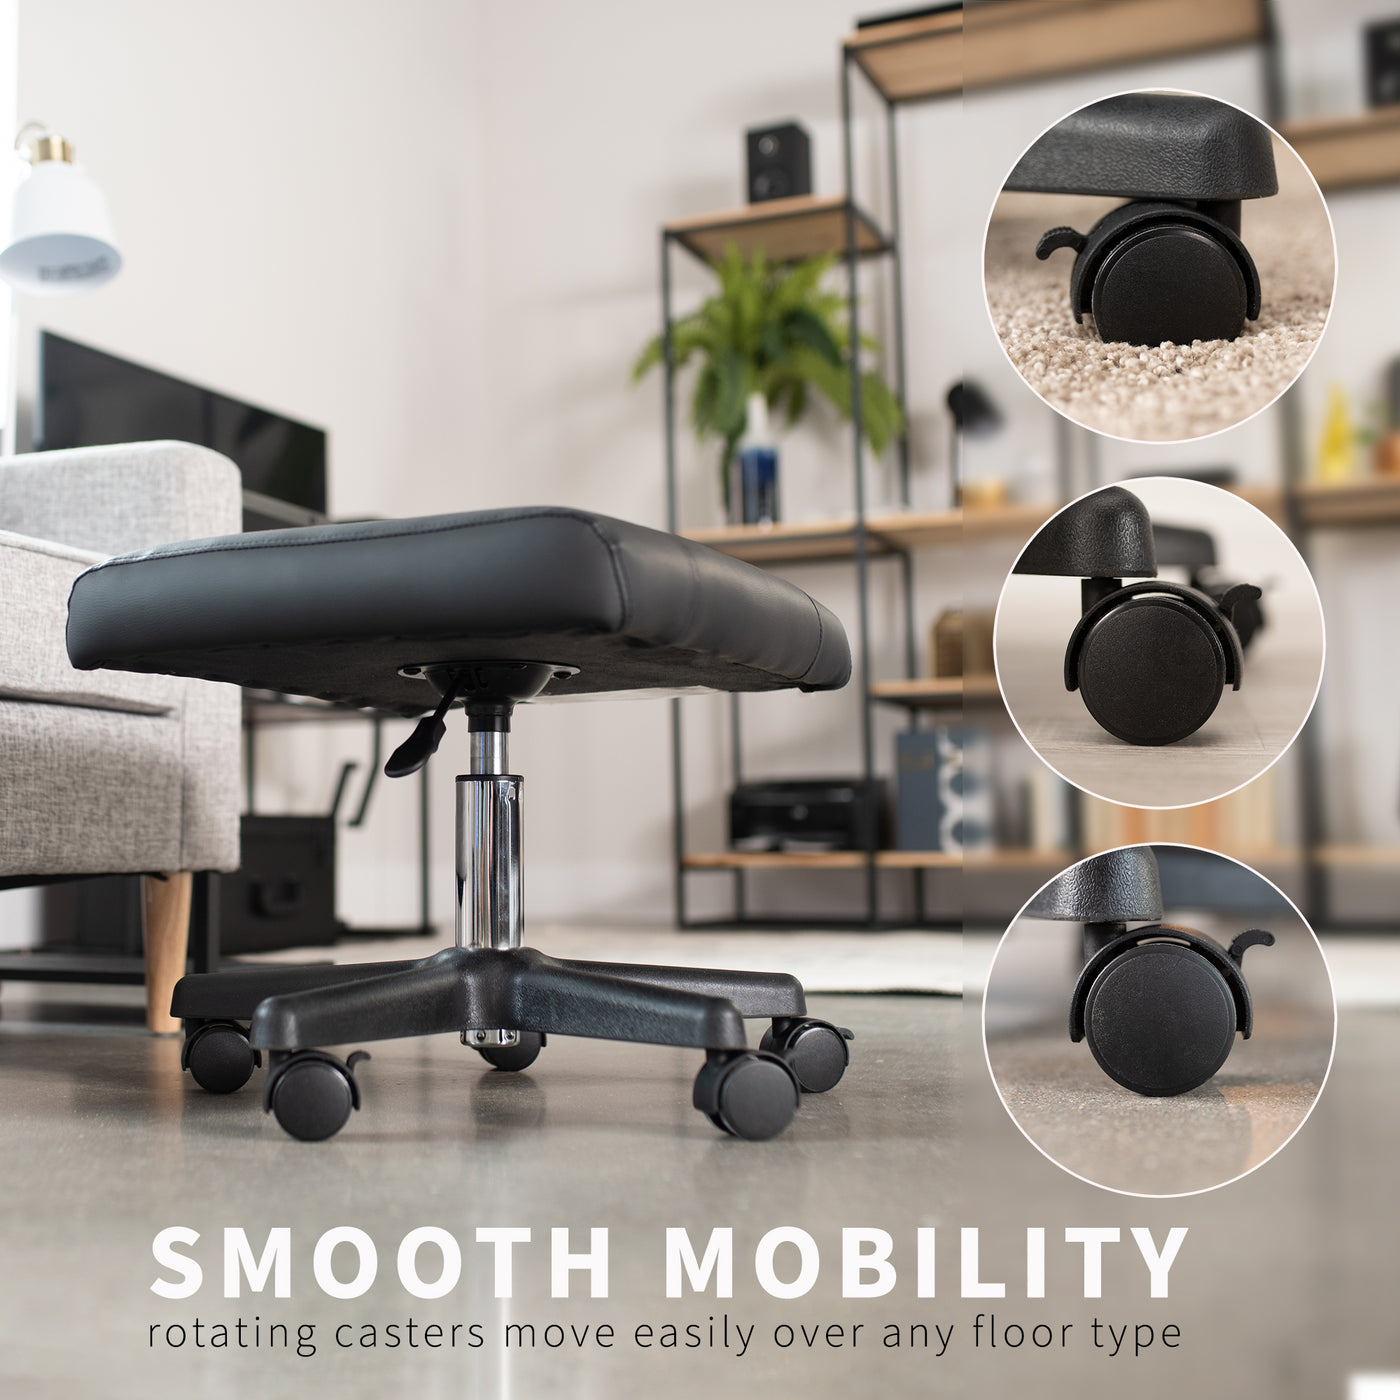 VIVO Mobile Footrest with Wheels, Ergonomic Rolling Ottoman Leg Rest for Work Comfort, Height Adjustable Computer Desk Stool with Thick Padding, Office Seat